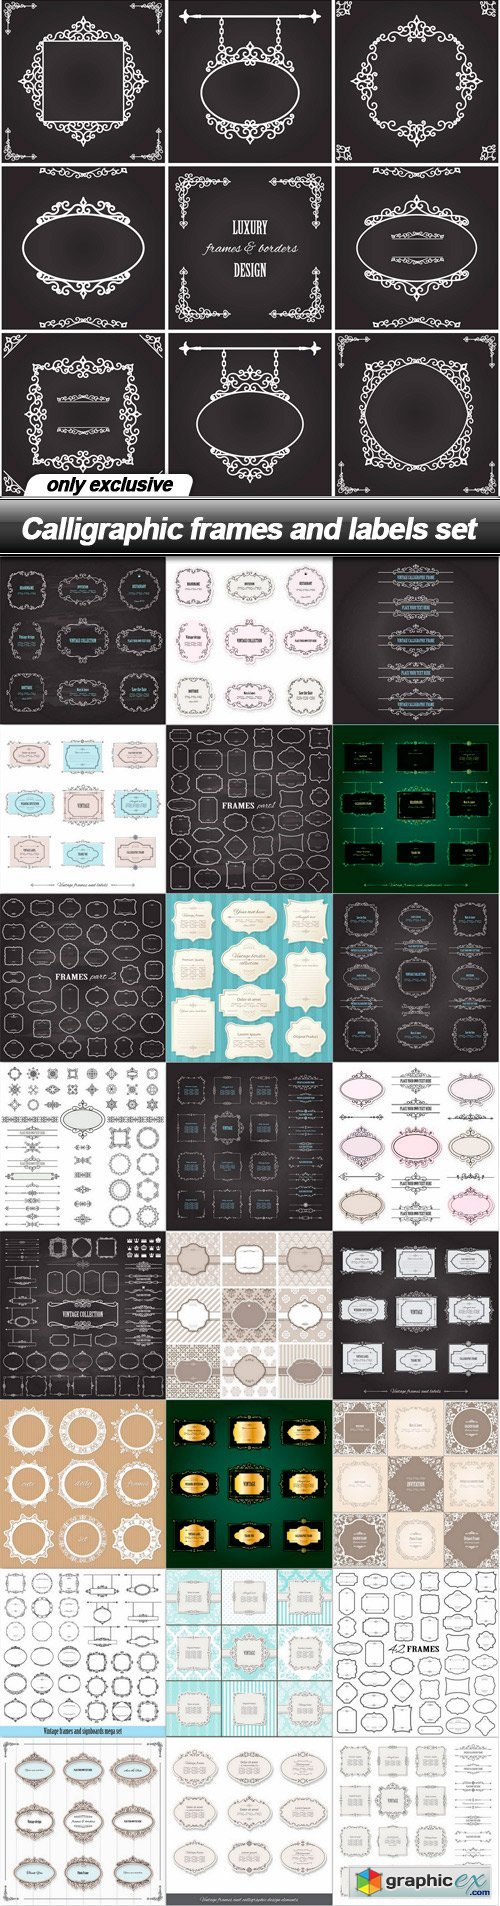 Calligraphic frames and labels set - 25 EPS